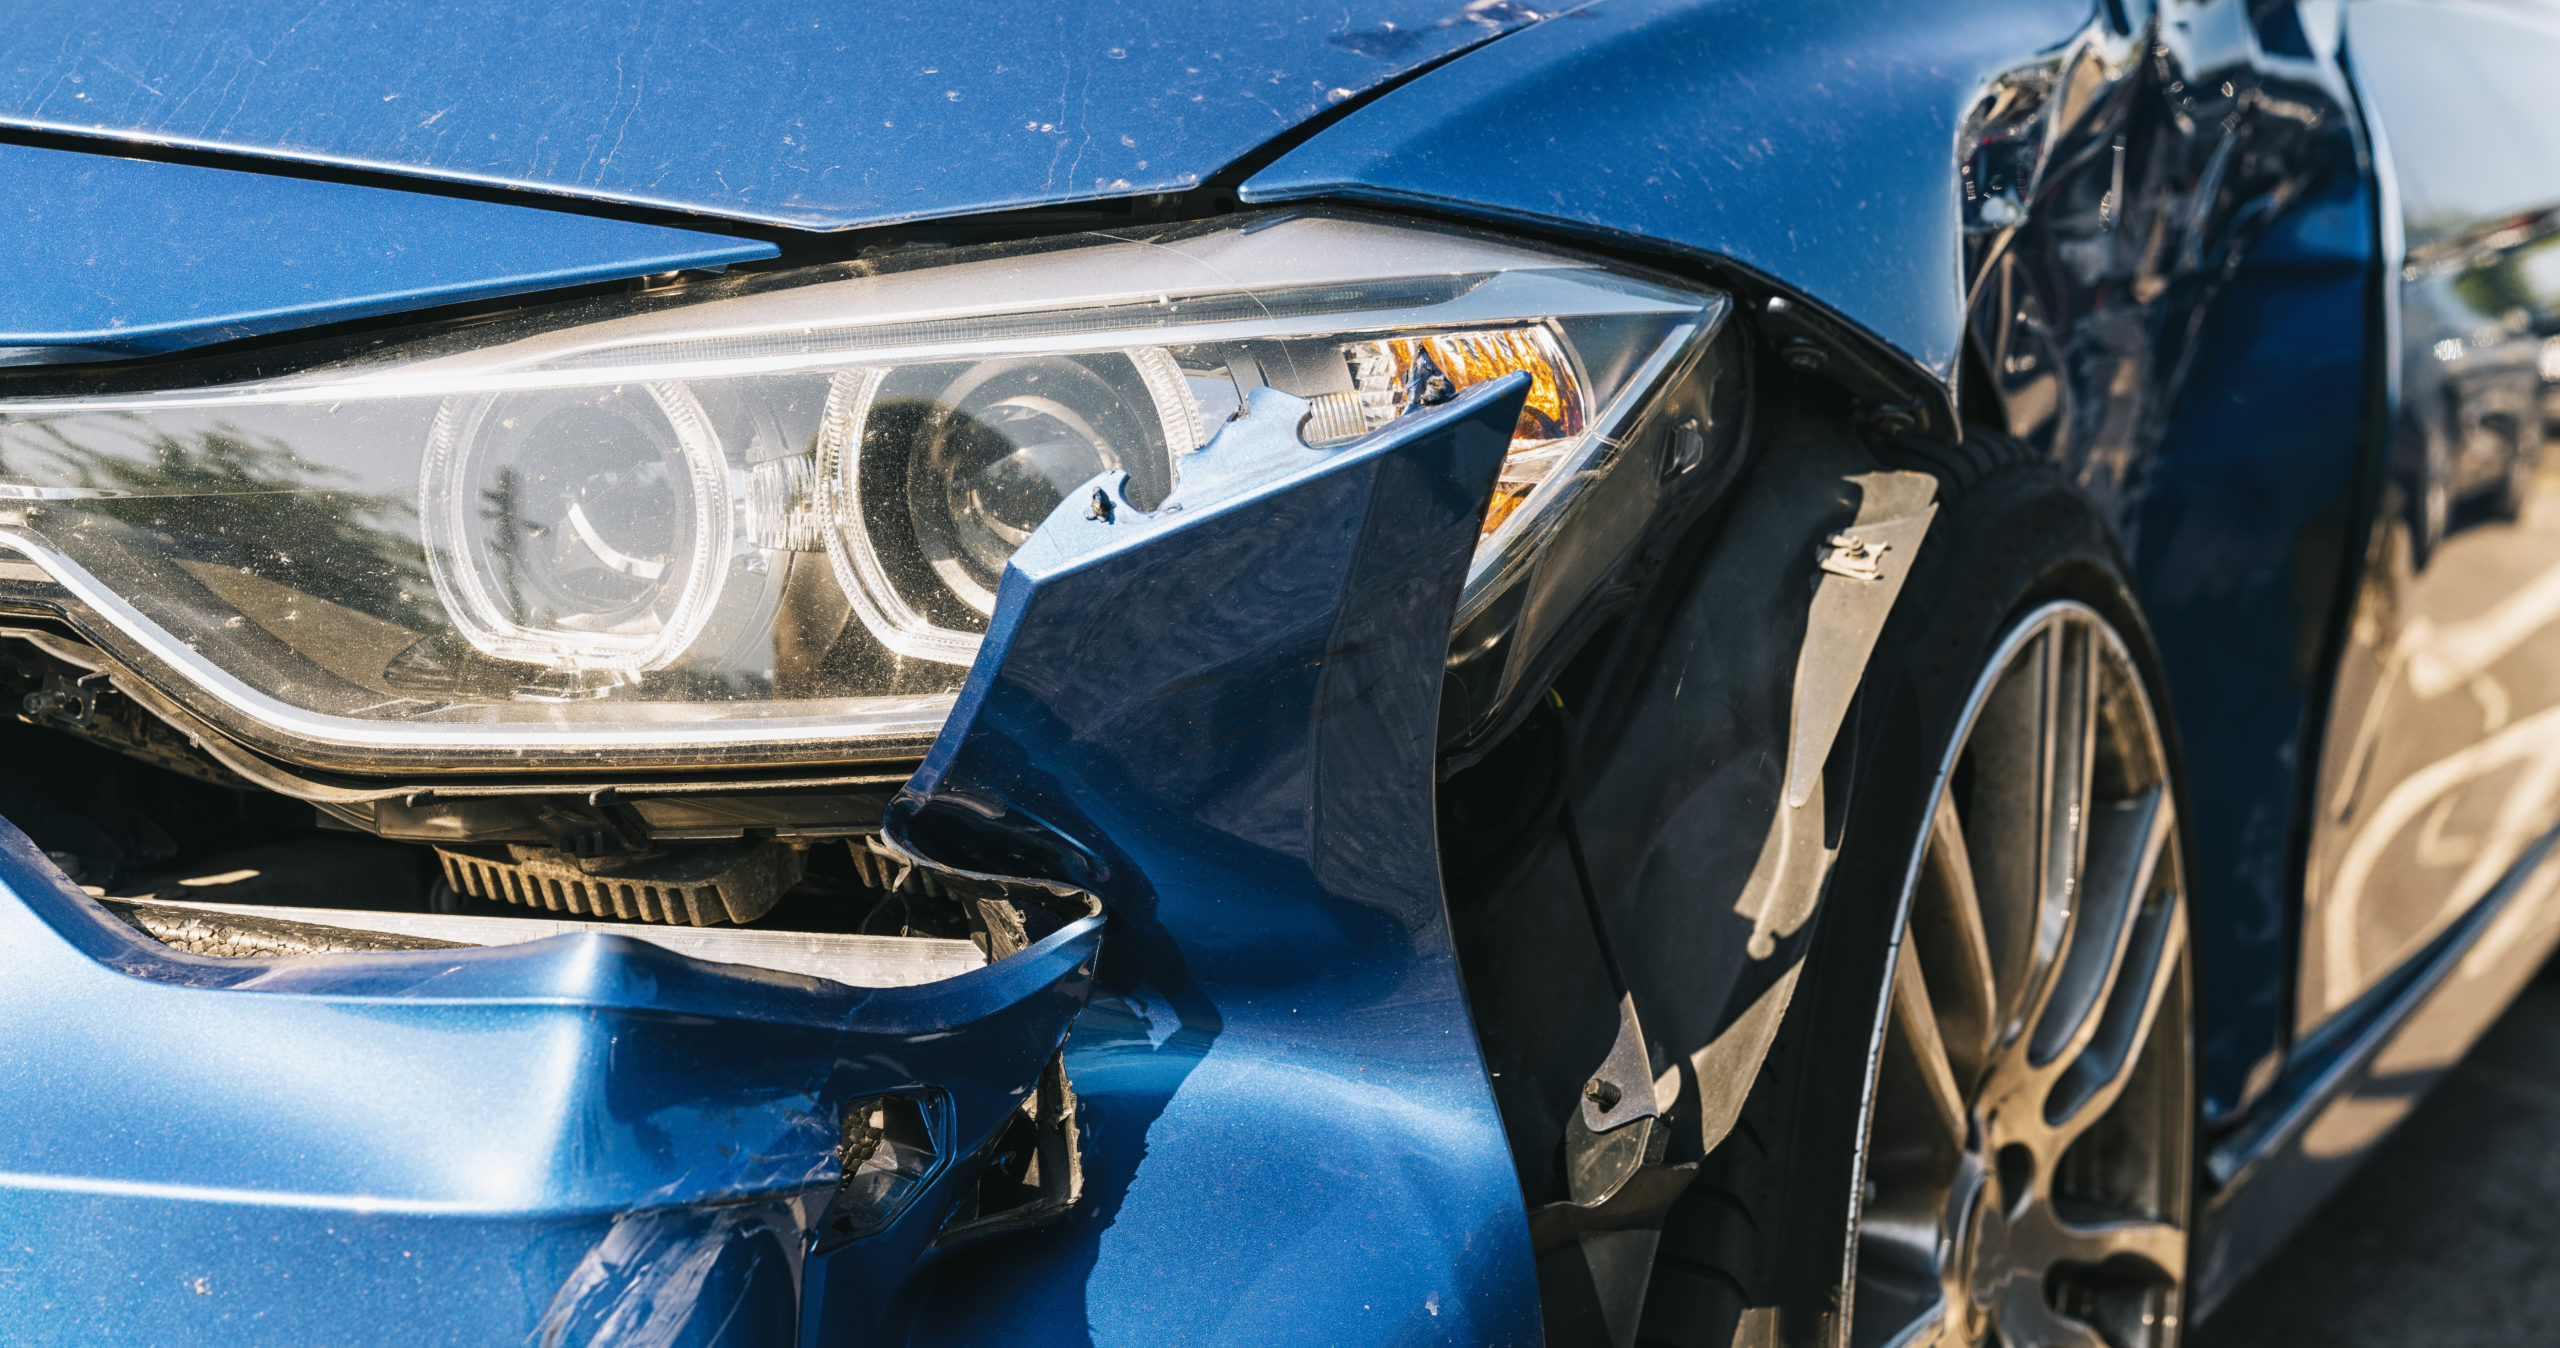 Car crash or accident. Front fender from a blue car and light damage and scratchs on bumper. Broken vehicle detail or close up.